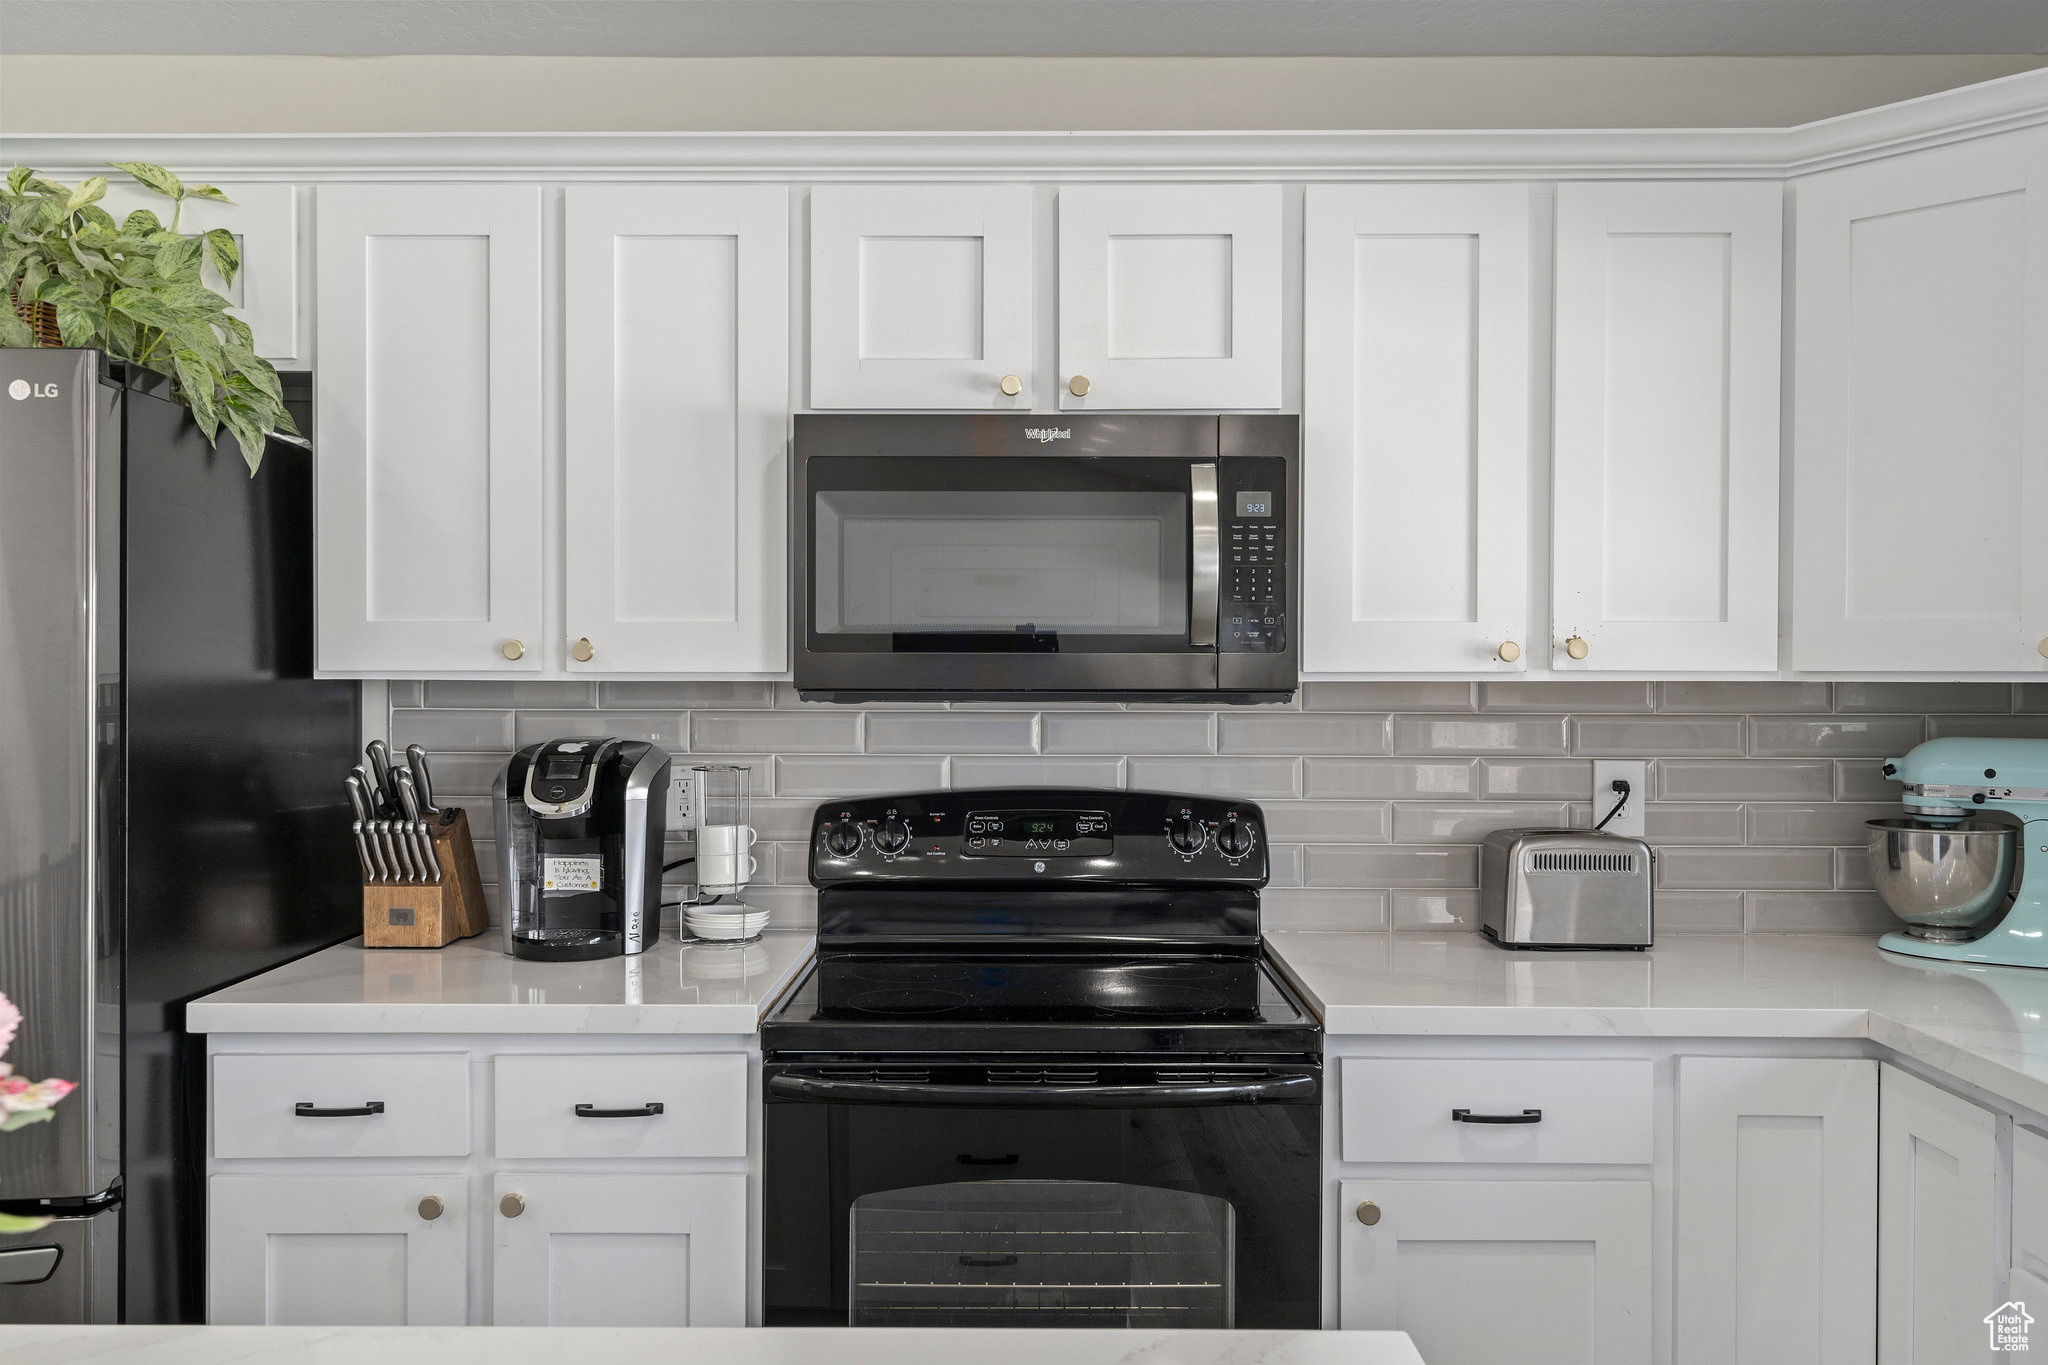 Kitchen featuring white cabinets, stainless steel appliances, and backsplash